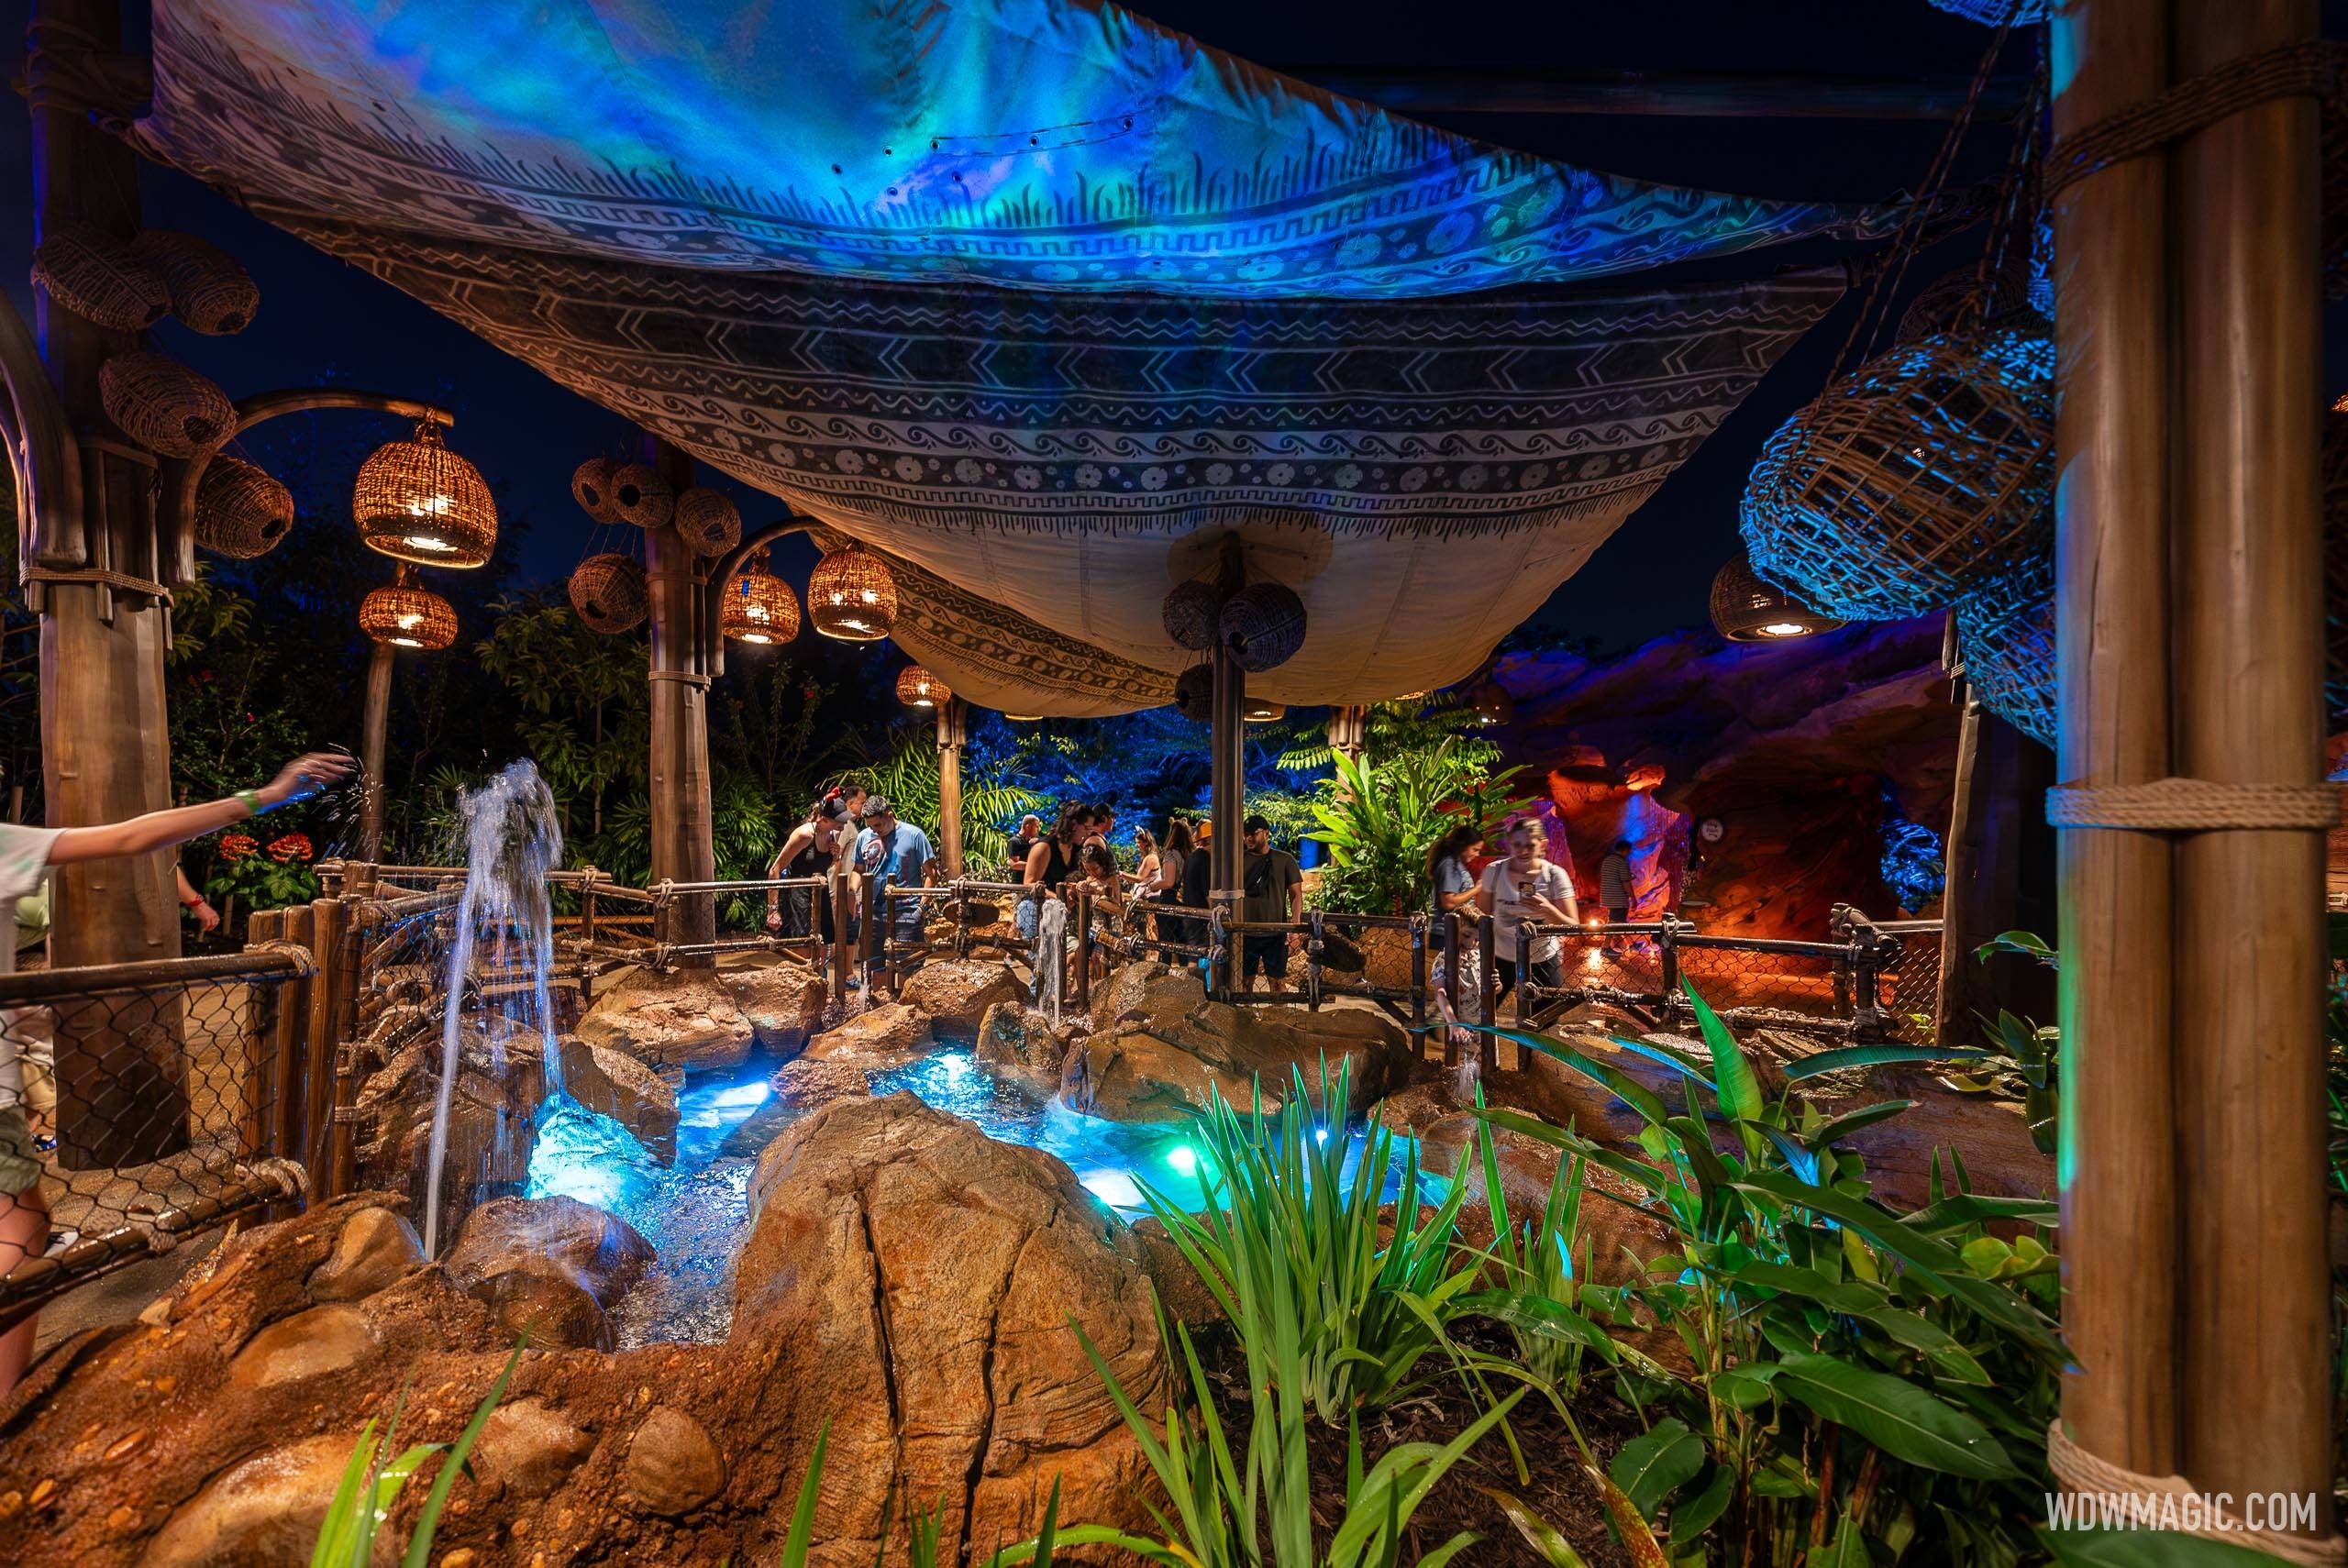 Nighttime tour of Journey of Water Inspired by Moana